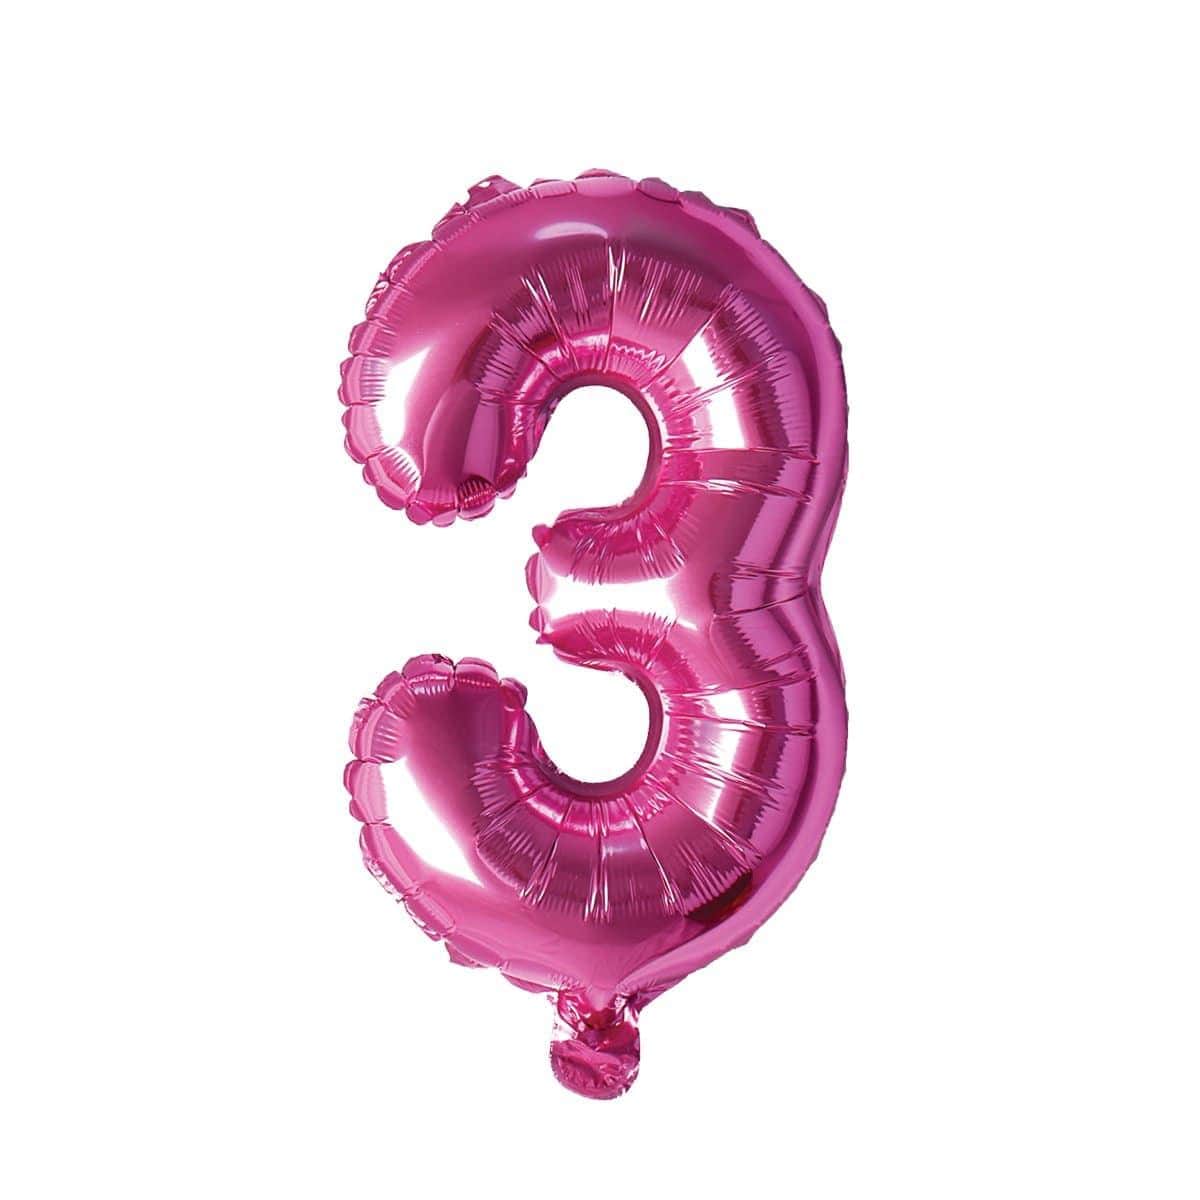 Buy Balloons Pink Number 3 Foil Balloon, 16 Inches sold at Party Expert